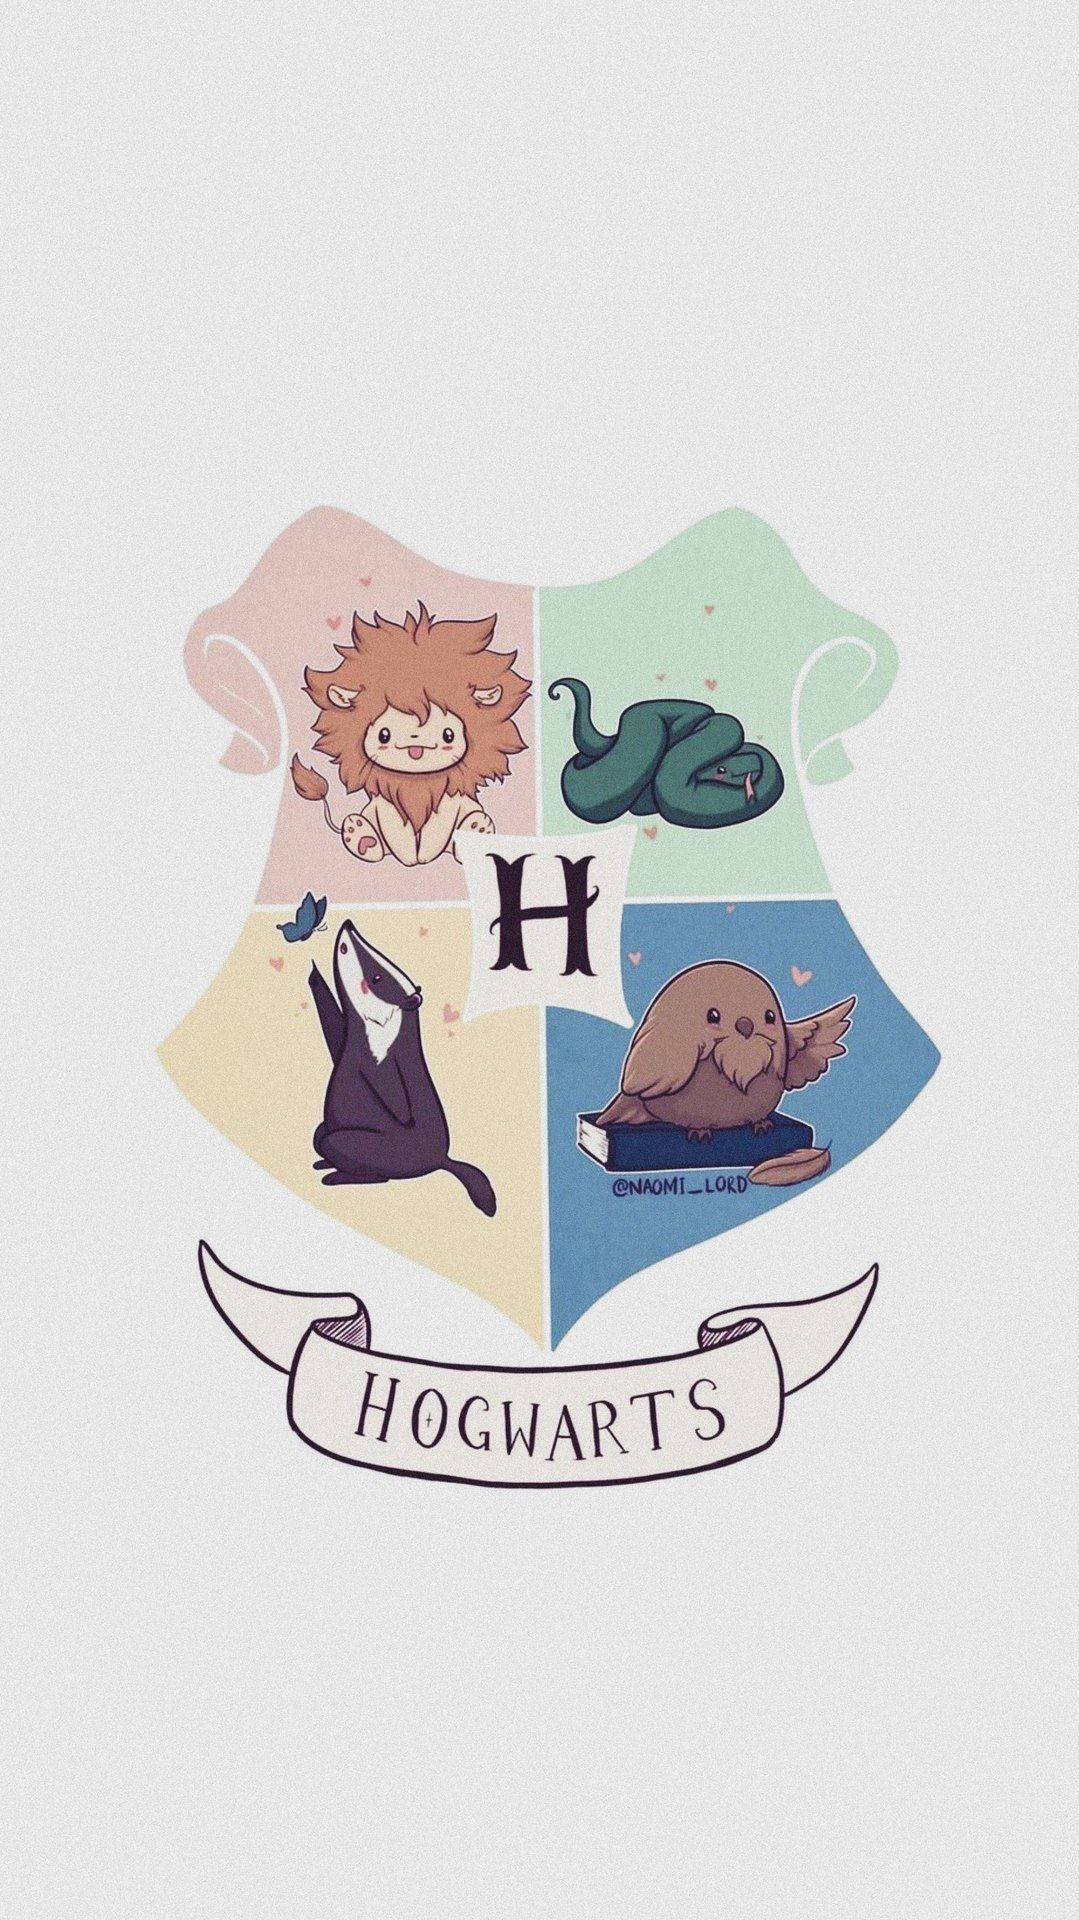 Top 999+ Cute Harry Potter Wallpaper Full HD, 4K✅Free to Use